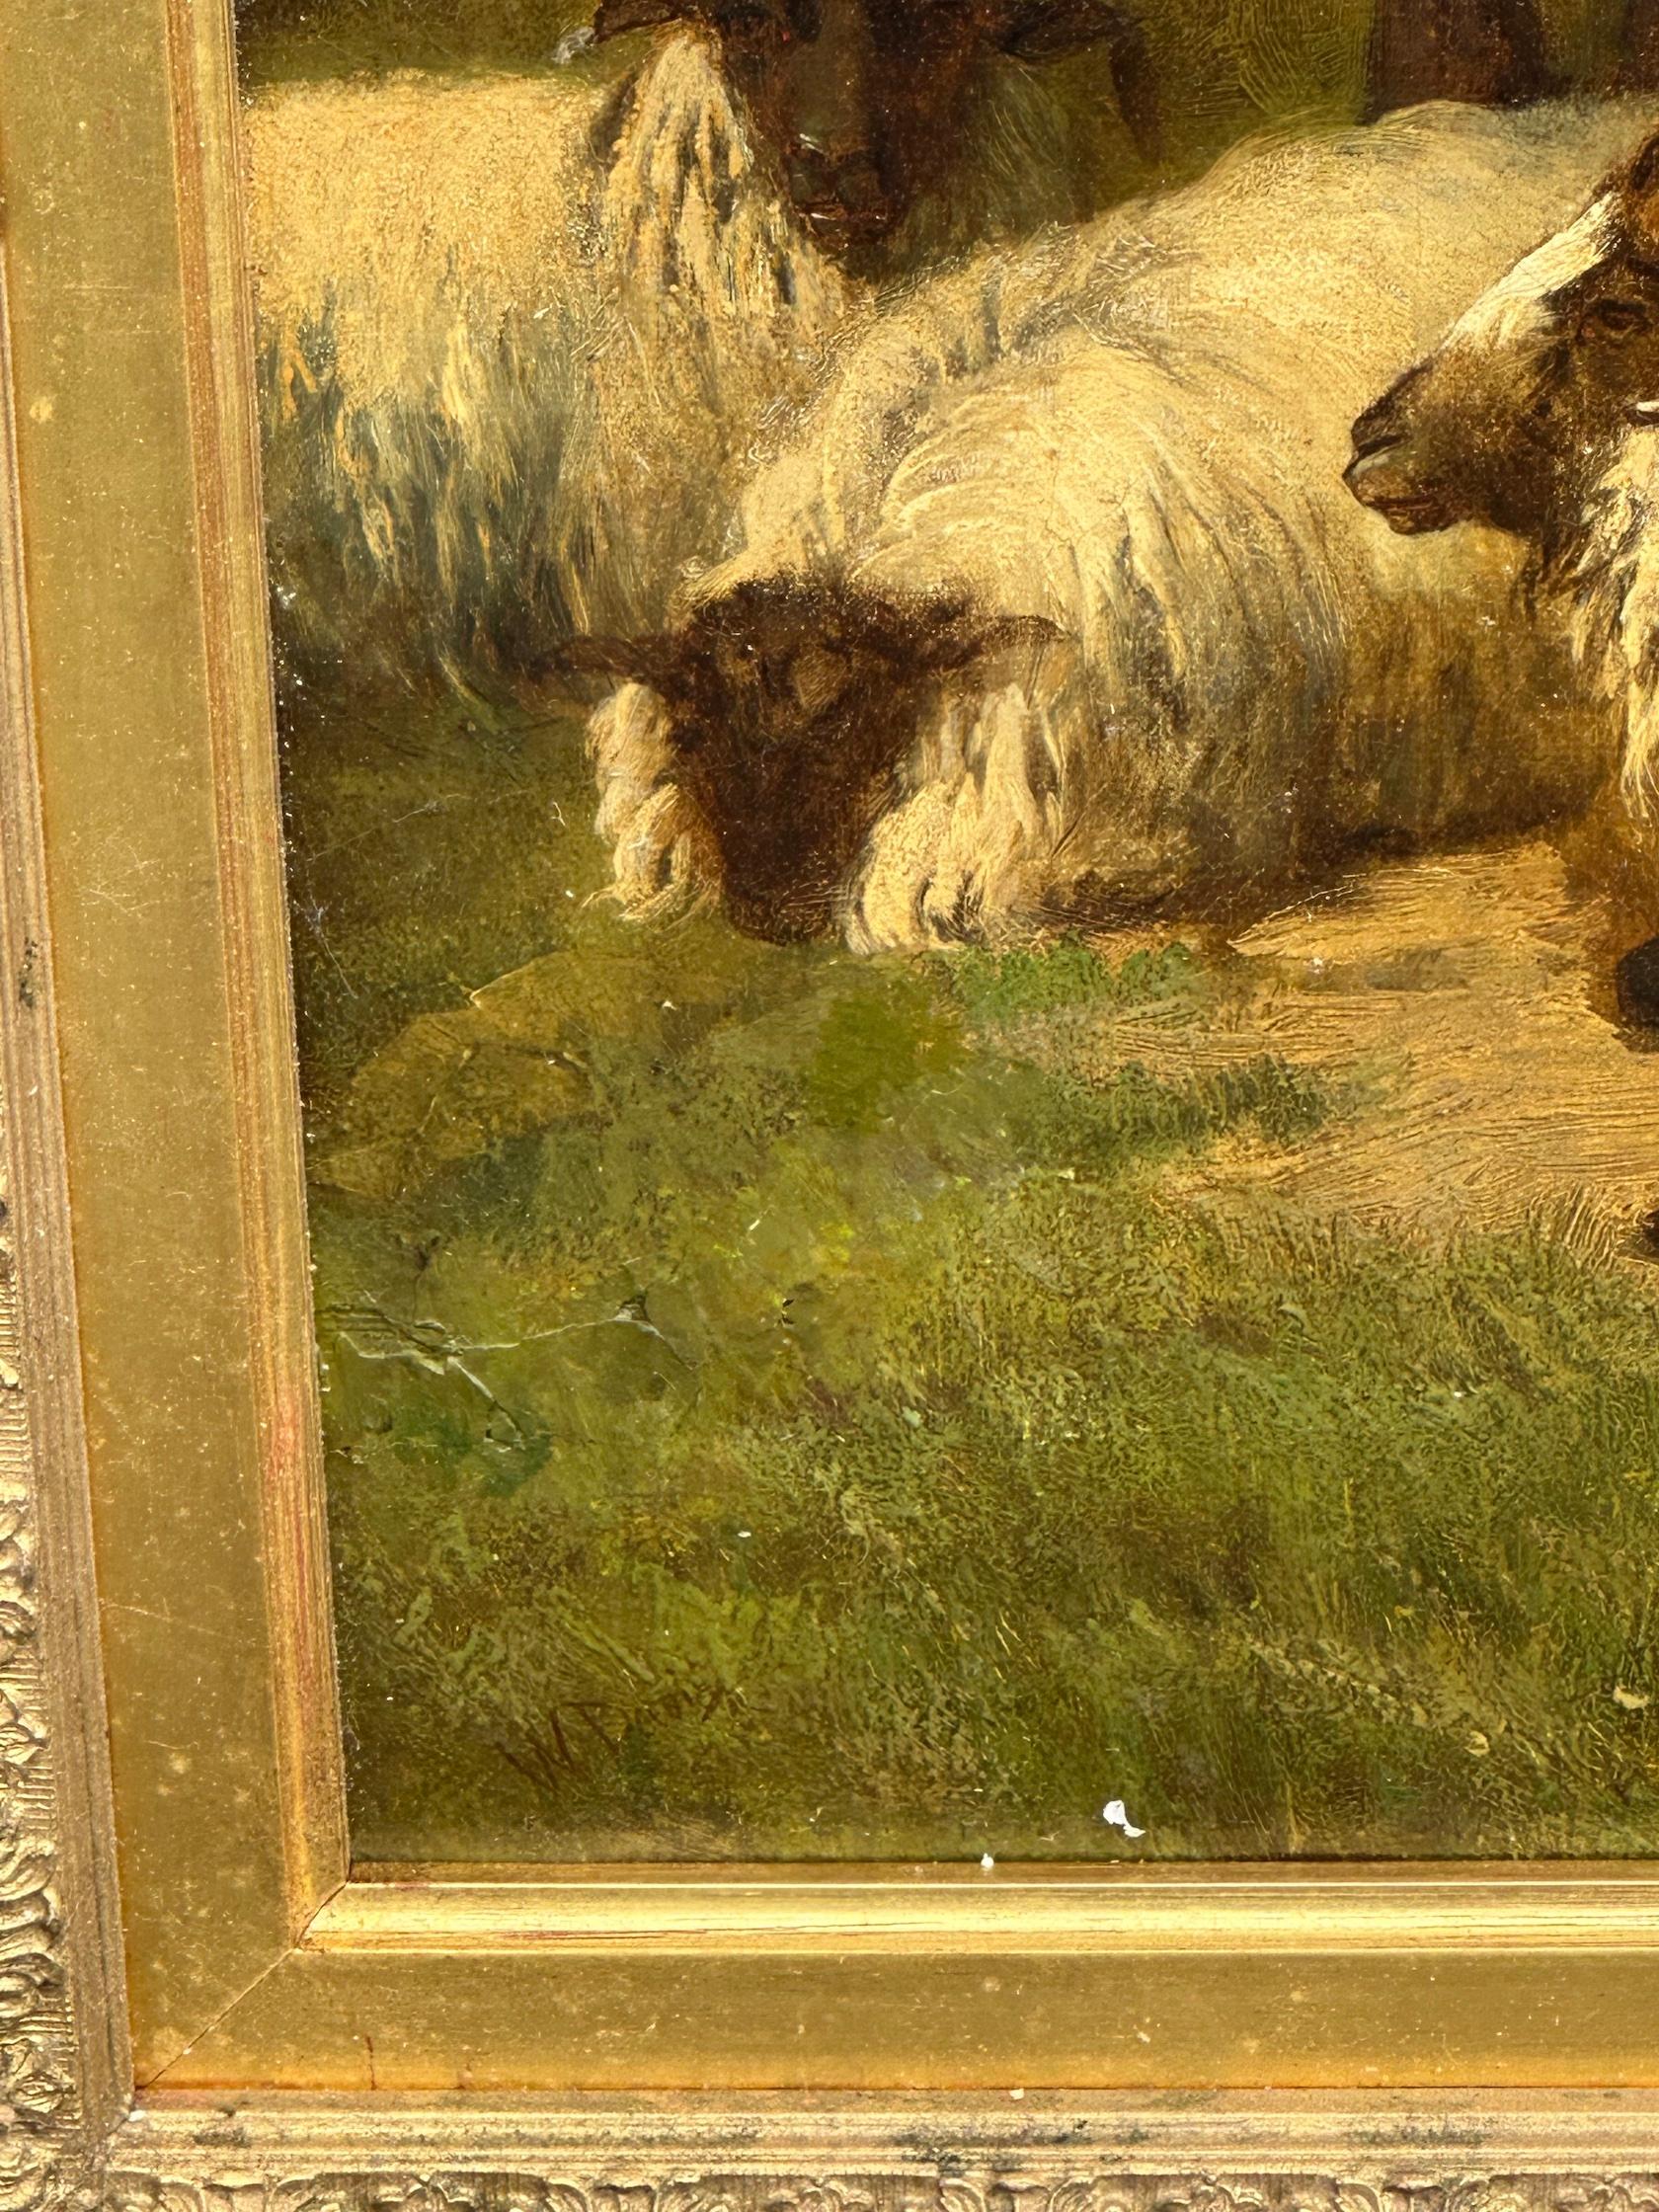 19th century Scottish farmers with cows , sheep, dogs in the Highlands For Sale 2